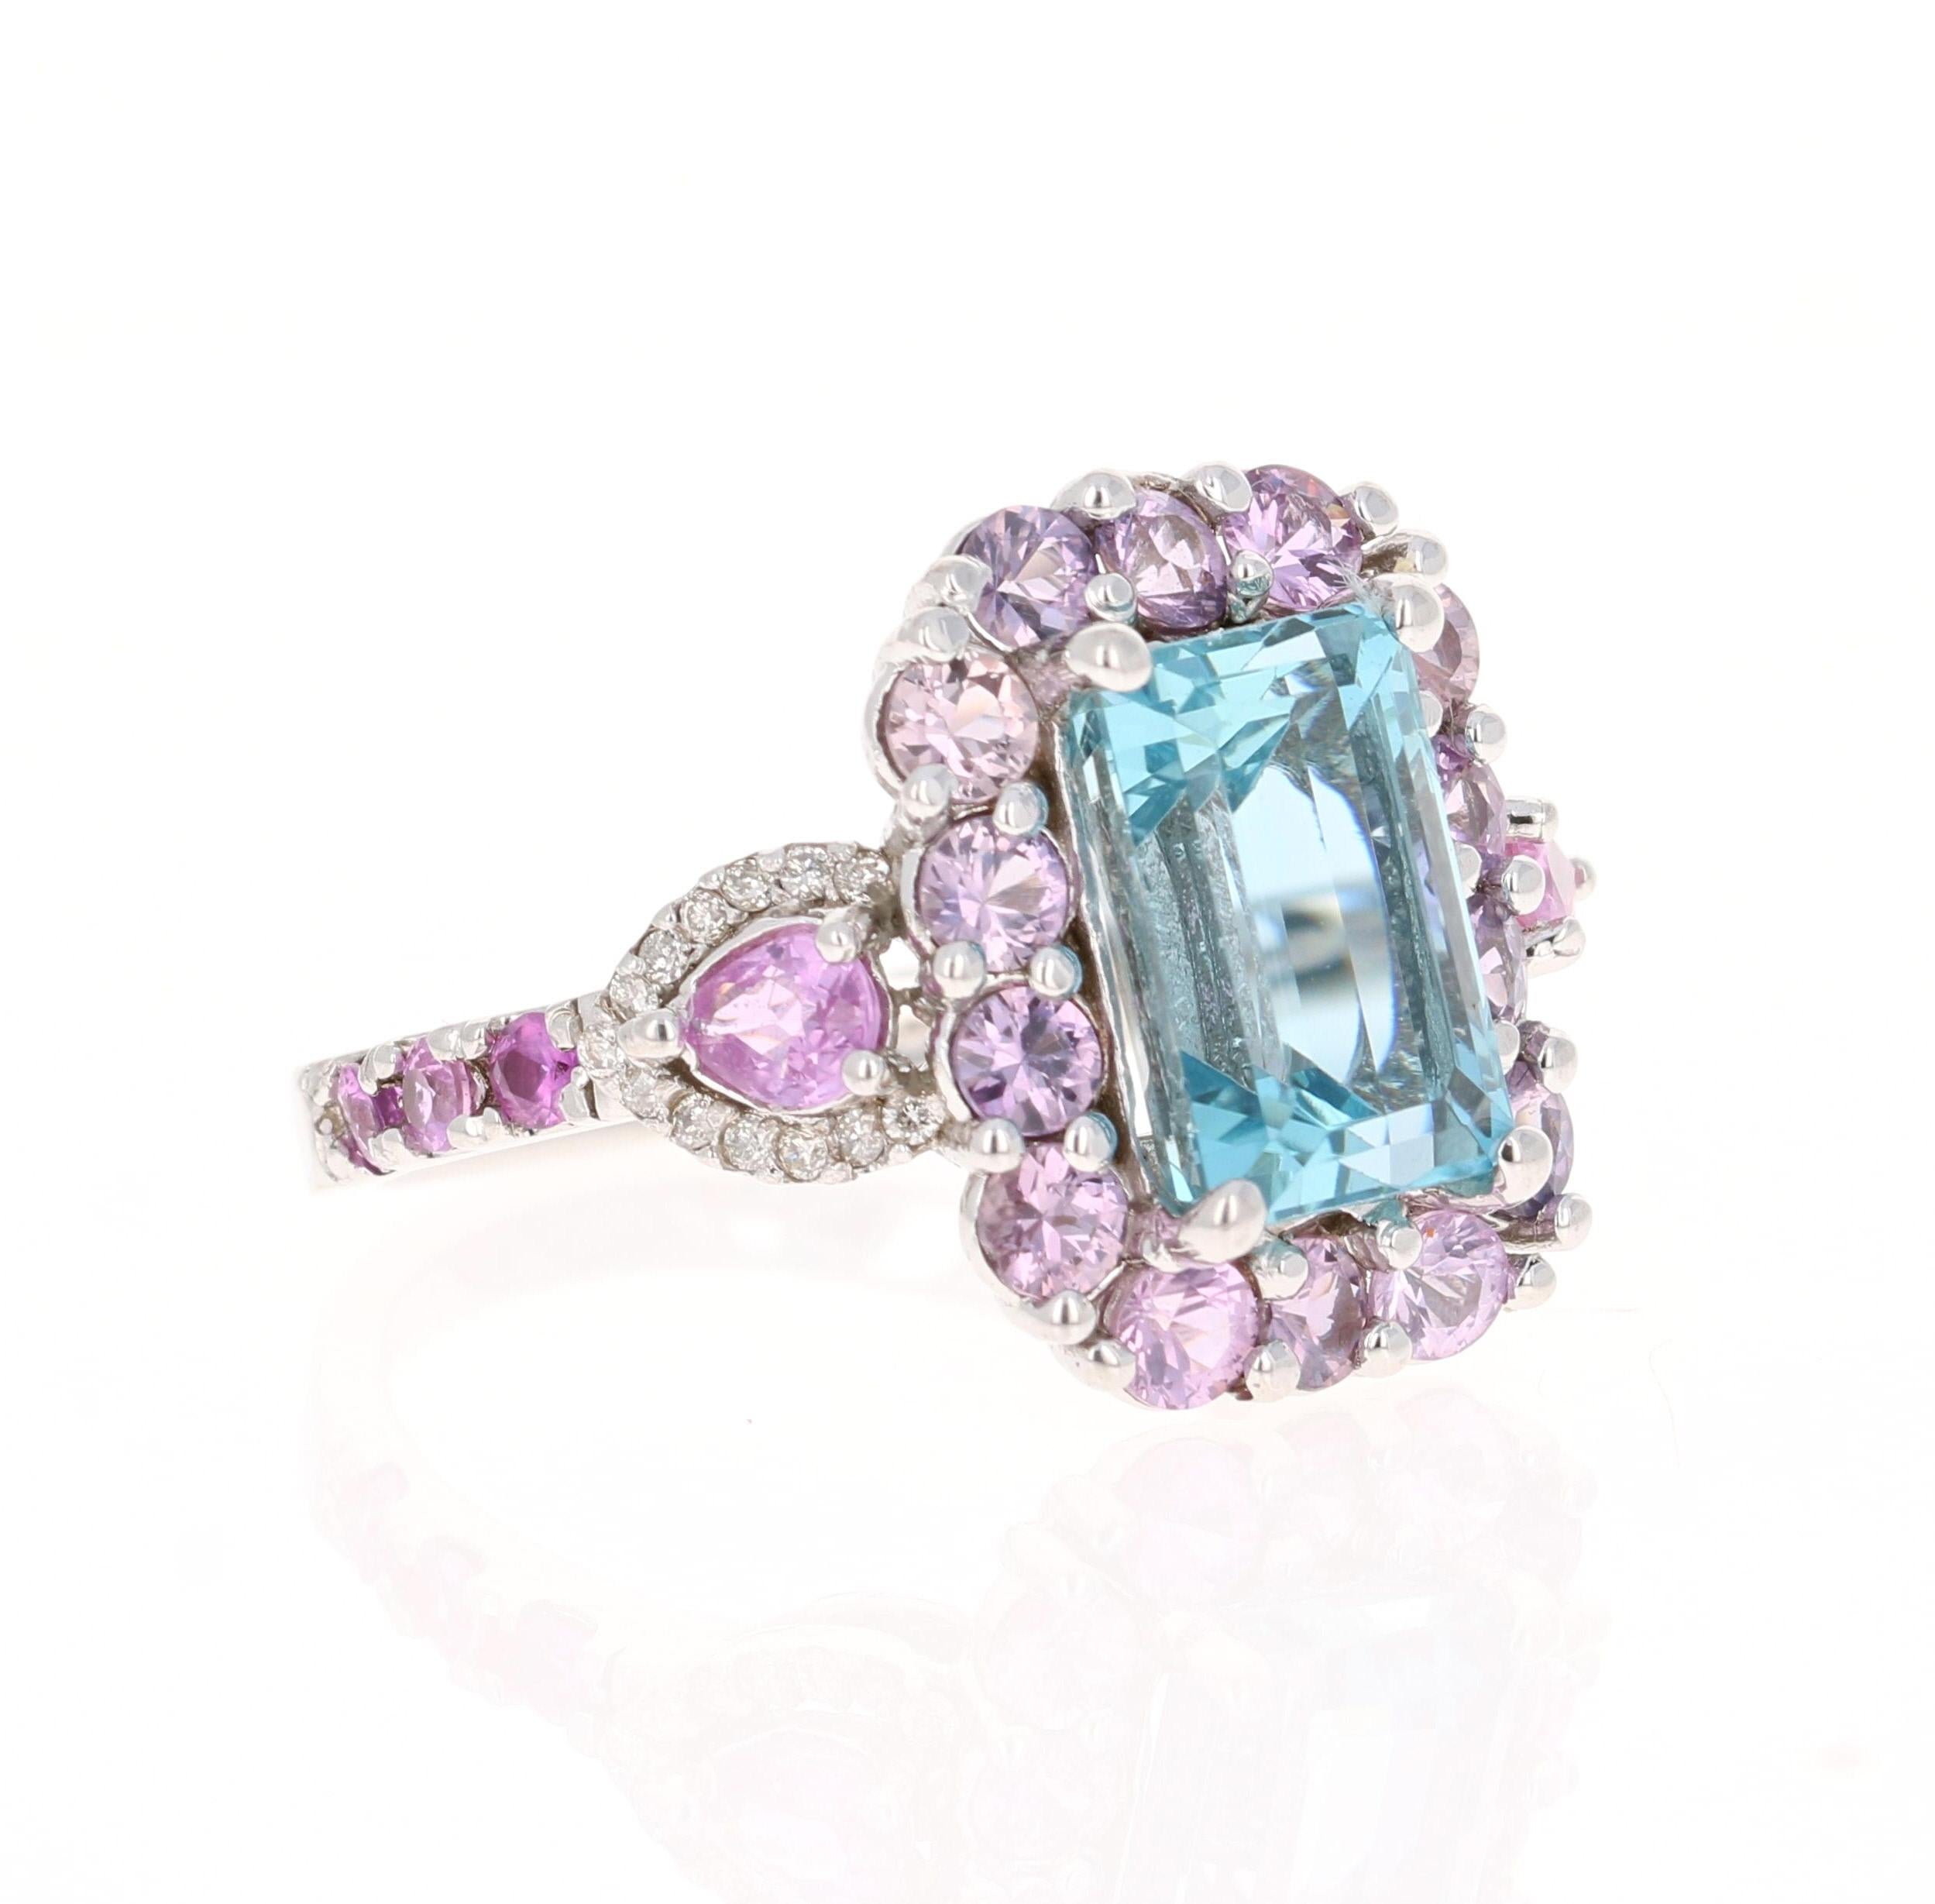 This ring has a gorgeous 3.60 Carat Emerald Cut Aquamarine and is surrounded by Pear Cut Pink Sapphires  that weigh 0.43 Carats. Also an additional 20 Pink Sapphires that weigh 1.90 carats. It is further embellished with 26 Round Cut Diamonds that